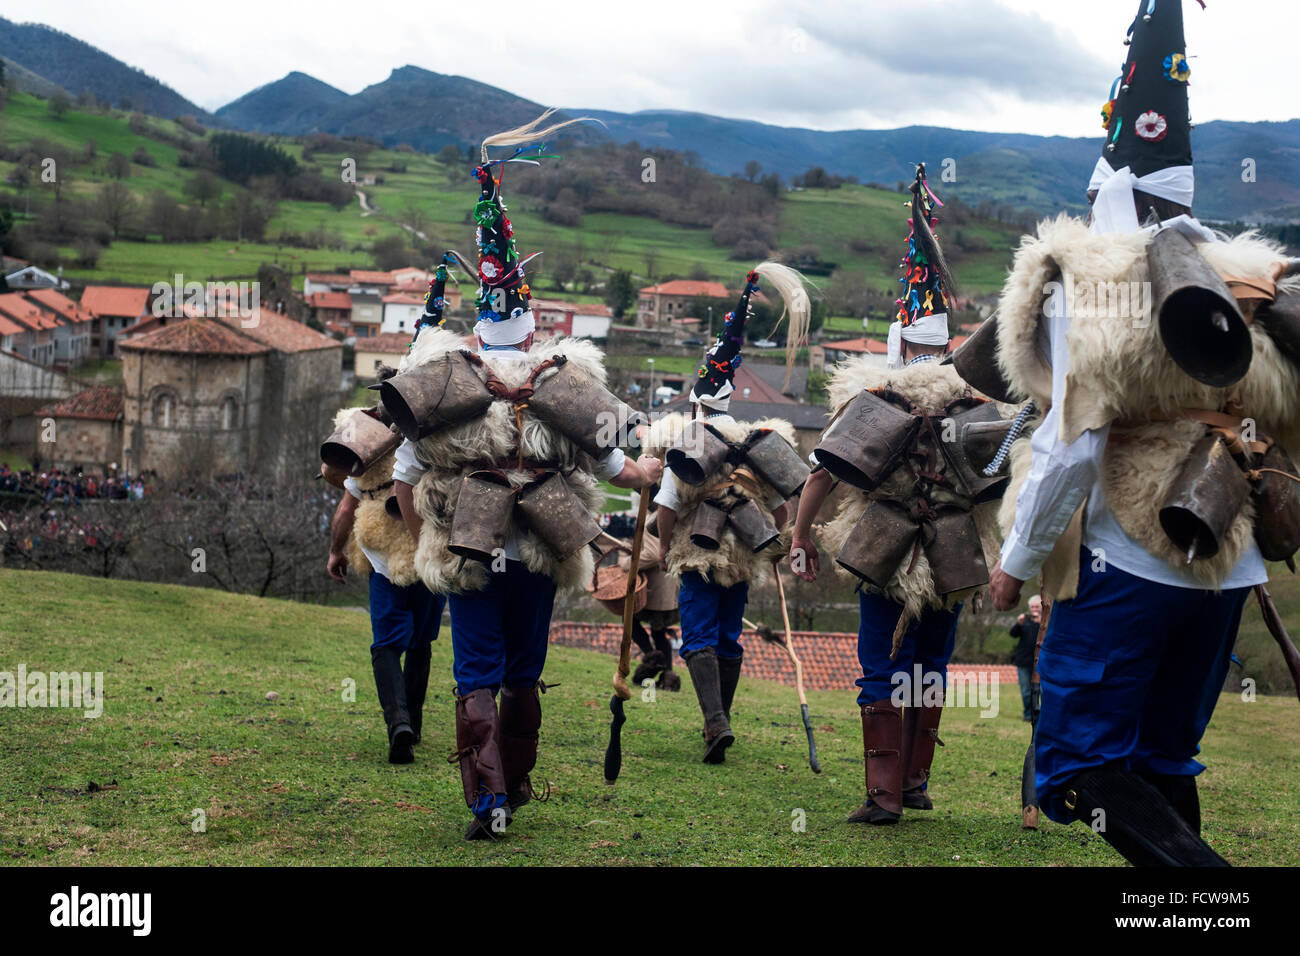 The zarramacos honking their roads lead to the village of Silio (Cantabria) for the carnival Vijanera the first winter carnival that takes place in Spain Stock Photo